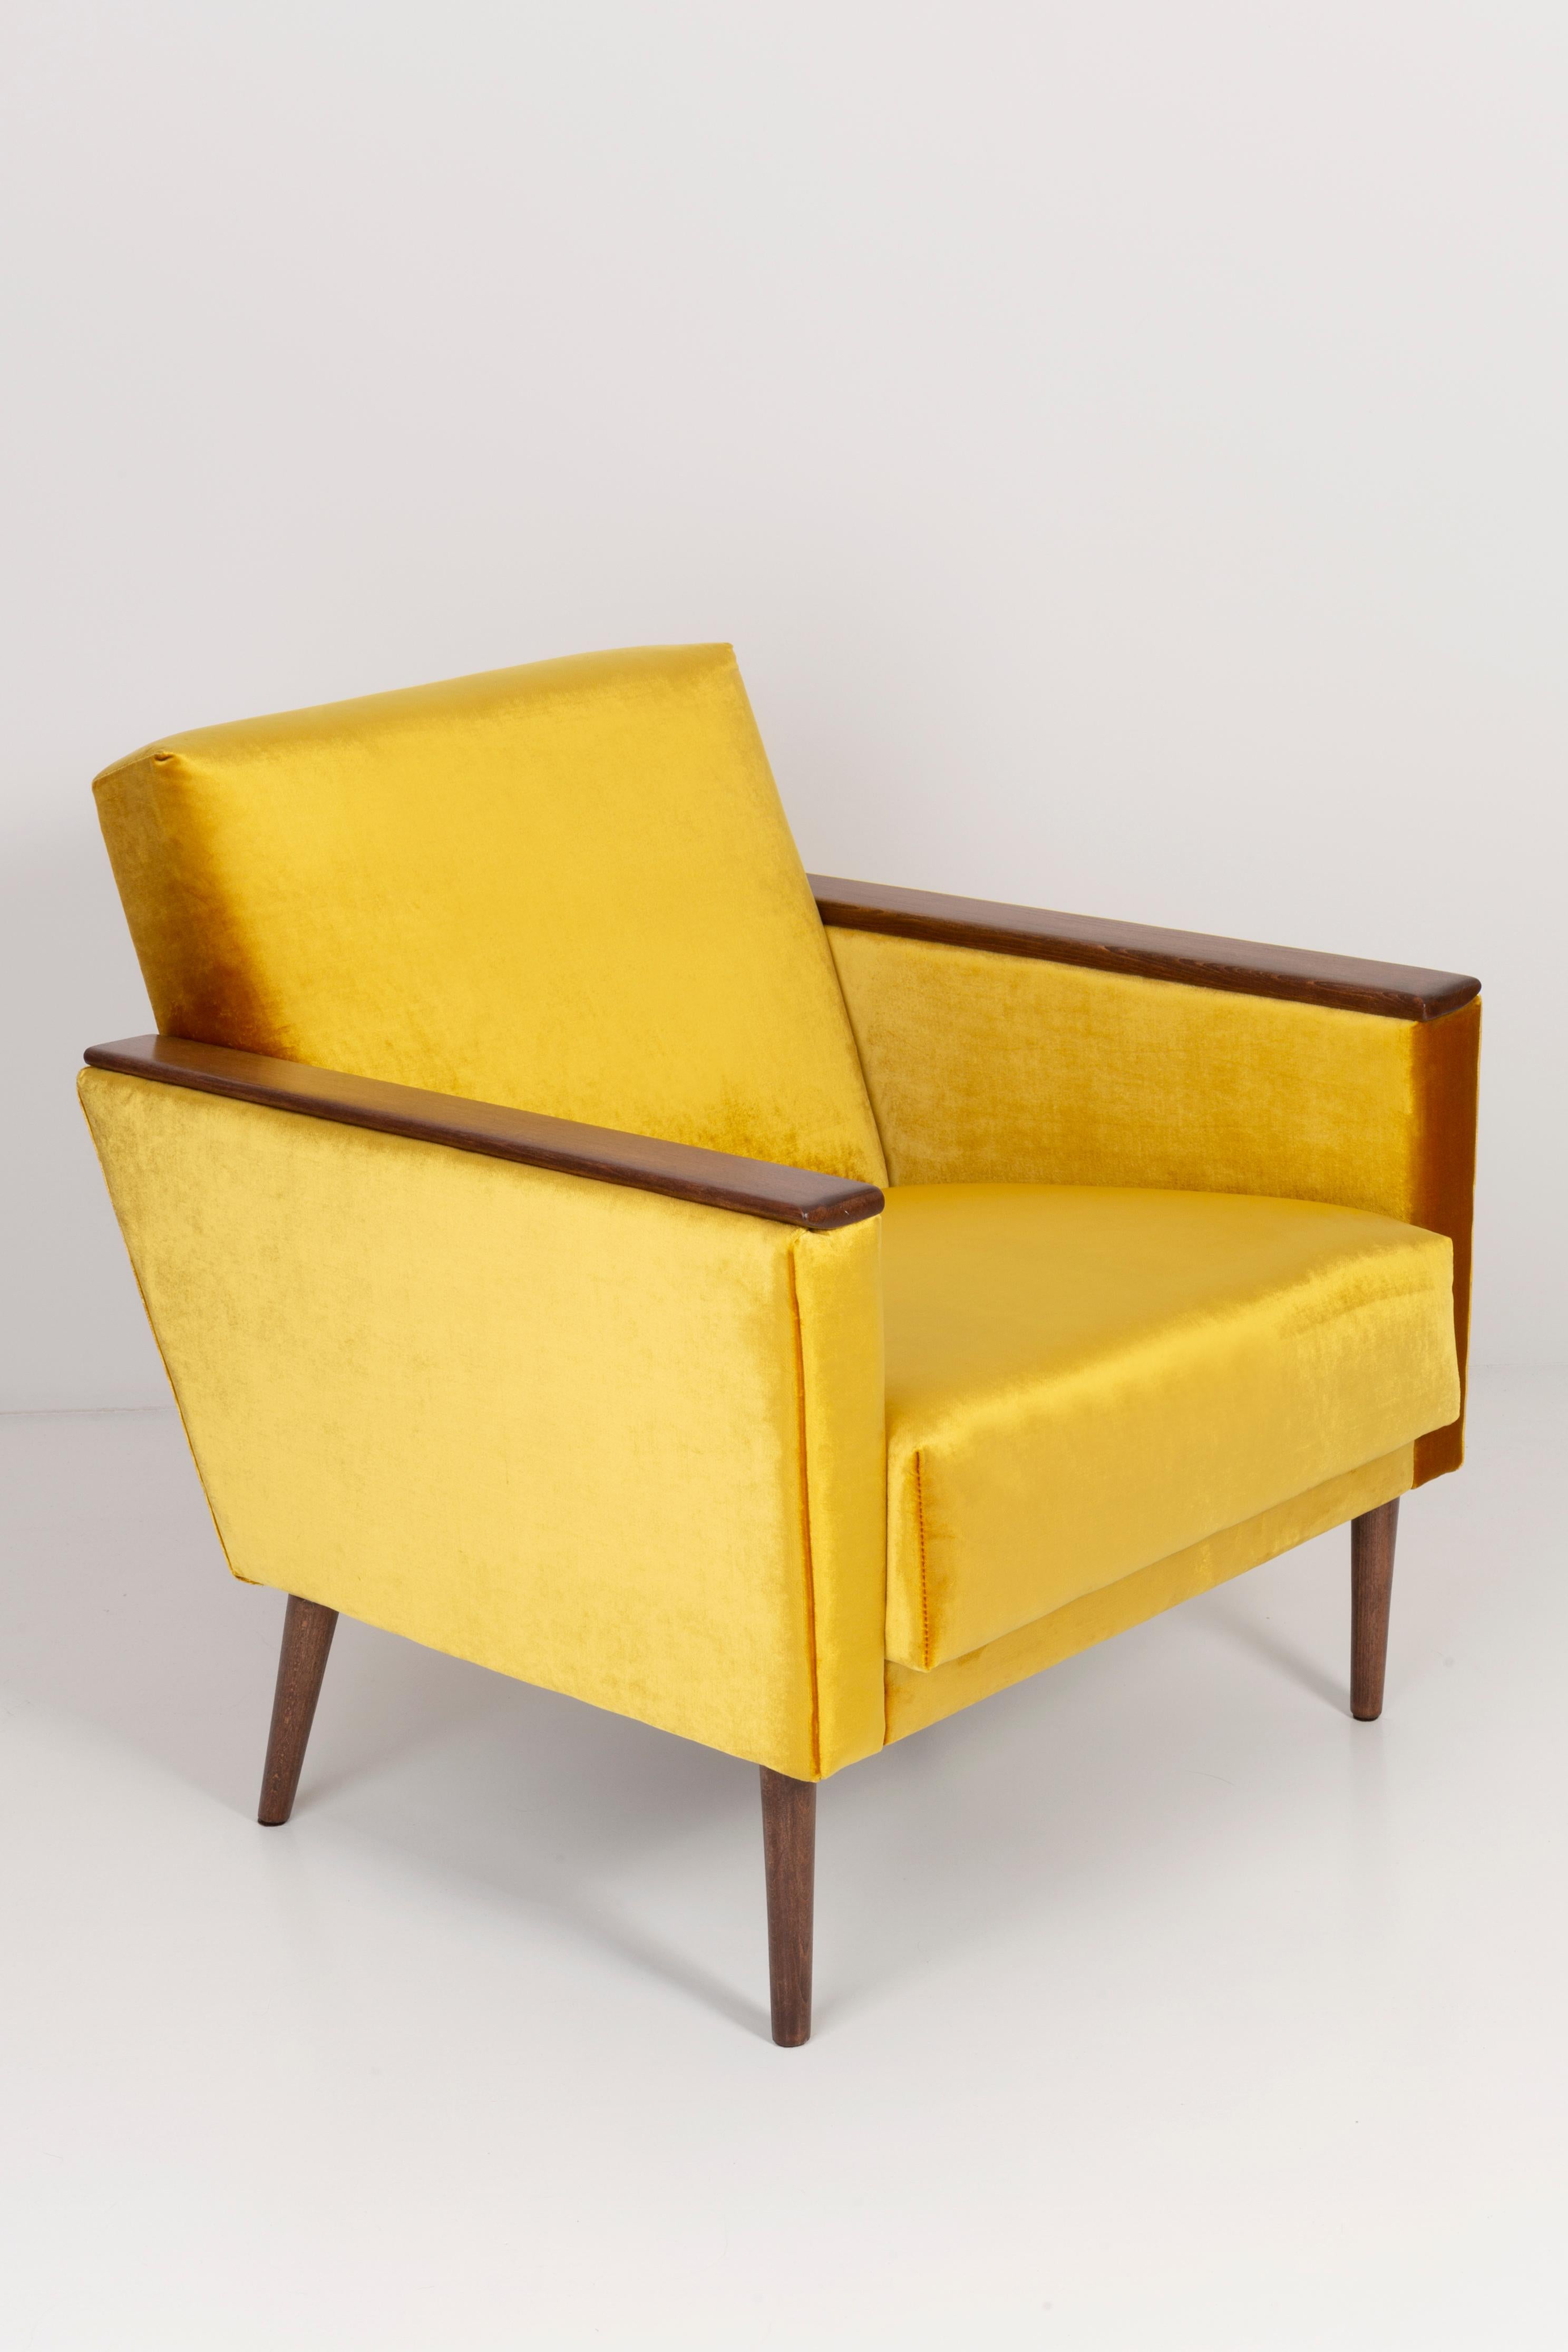 German armchairs produced in the 1960s in Berlin. The armchairs are after a thorough renovation of upholstery and carpentry. The wooden frame is thoroughly cleaned and covered with a semi-matte varnish in the color of a nut. The upholstery is made